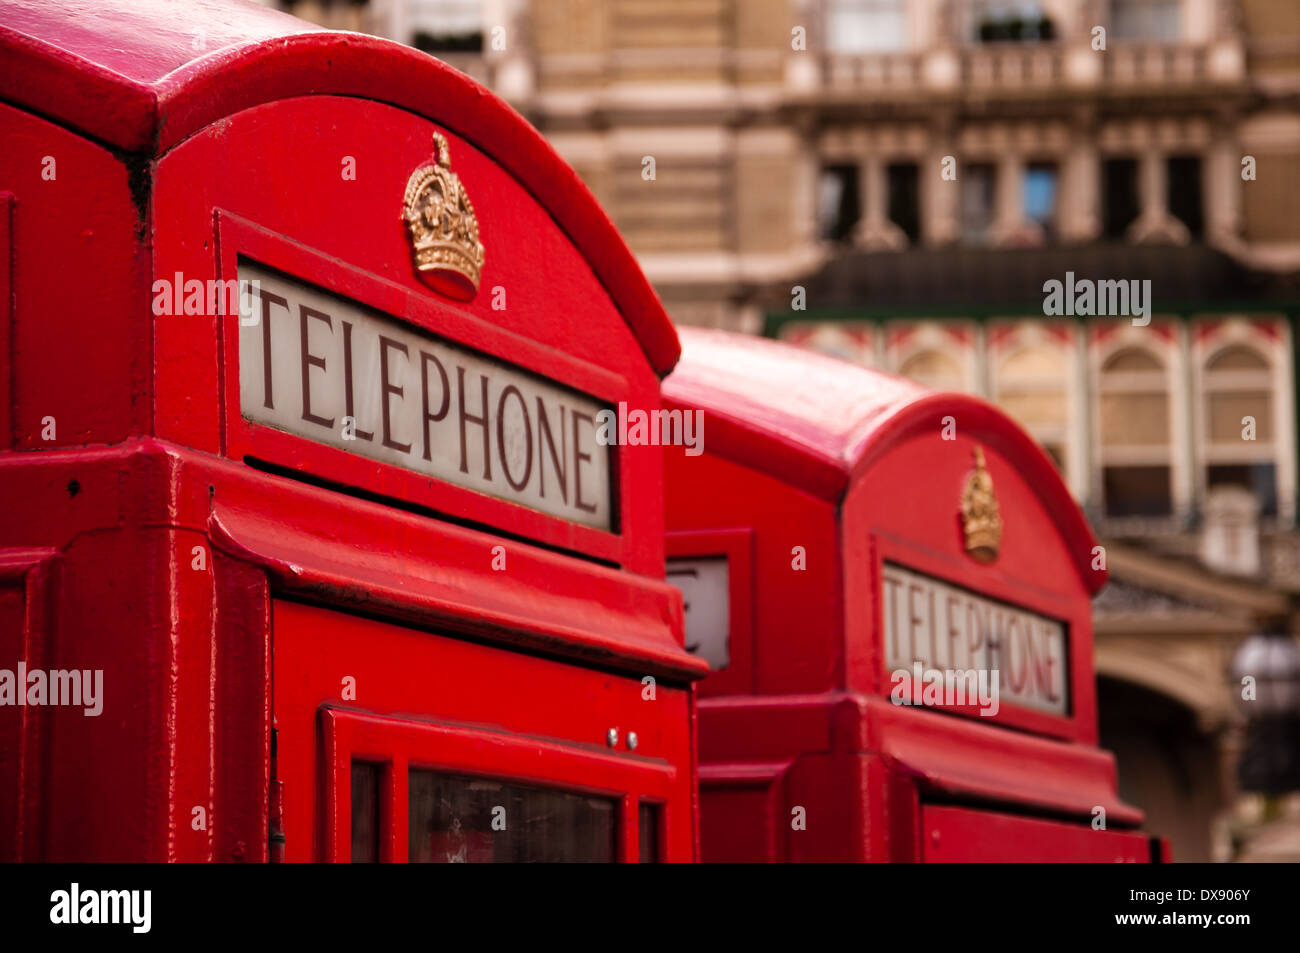 typical red telephone booth in london Stock Photo